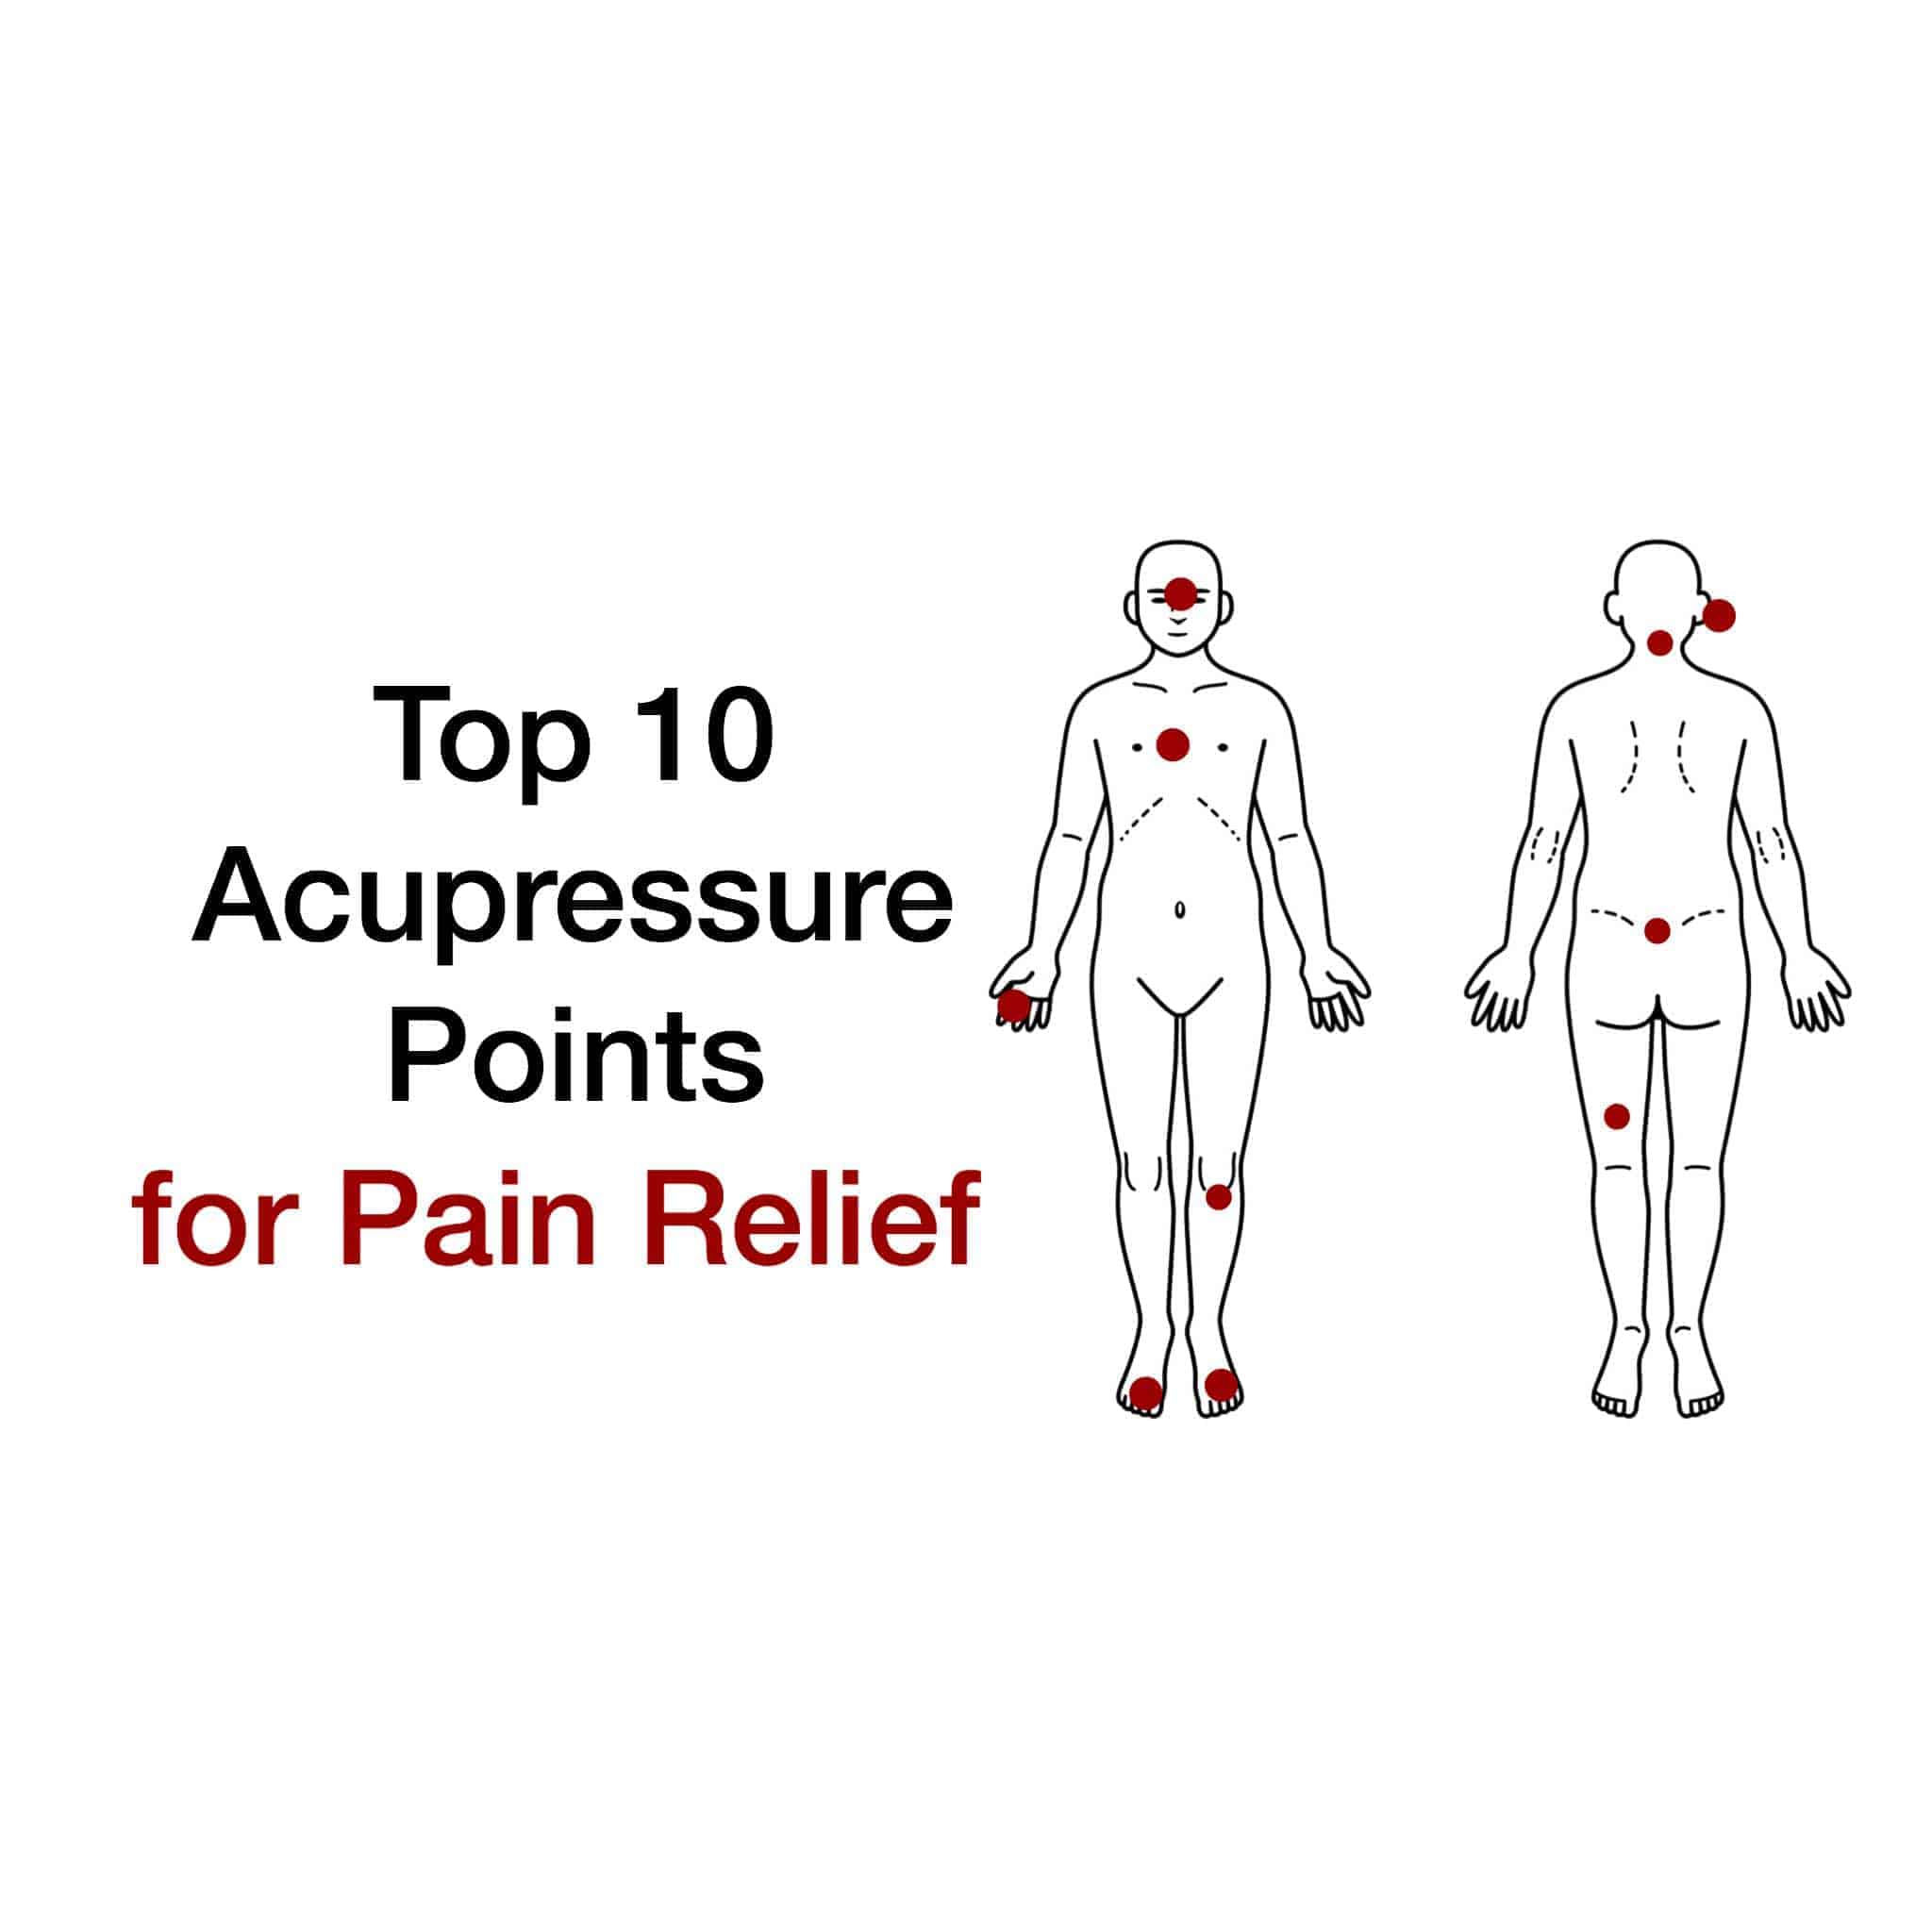 Acupressure points for back pain